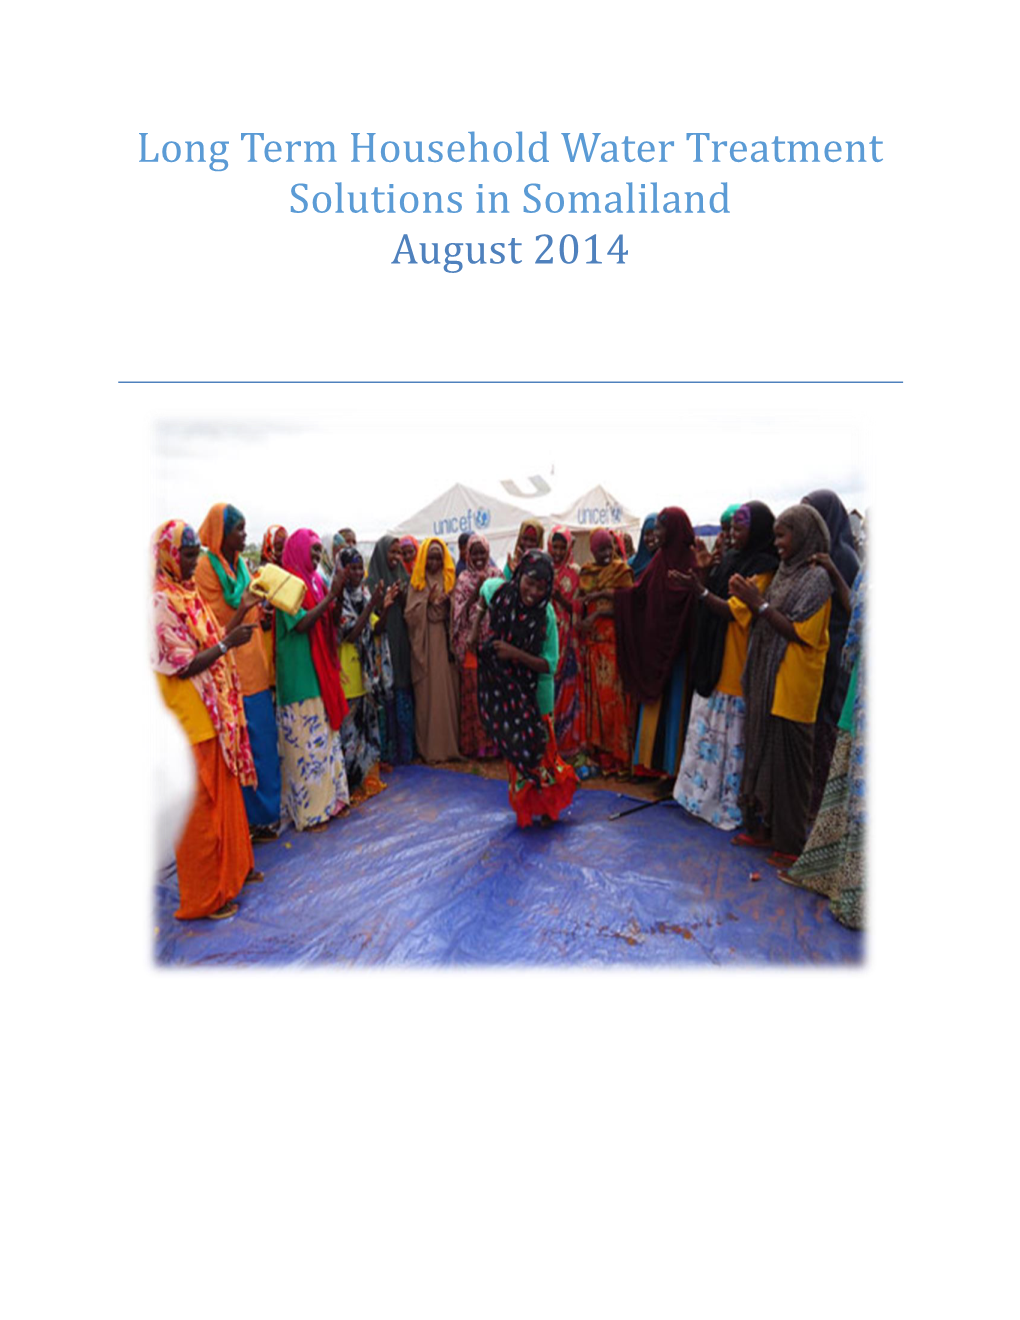 Long Term Household Water Treatment Solutions in Somaliland August 2014